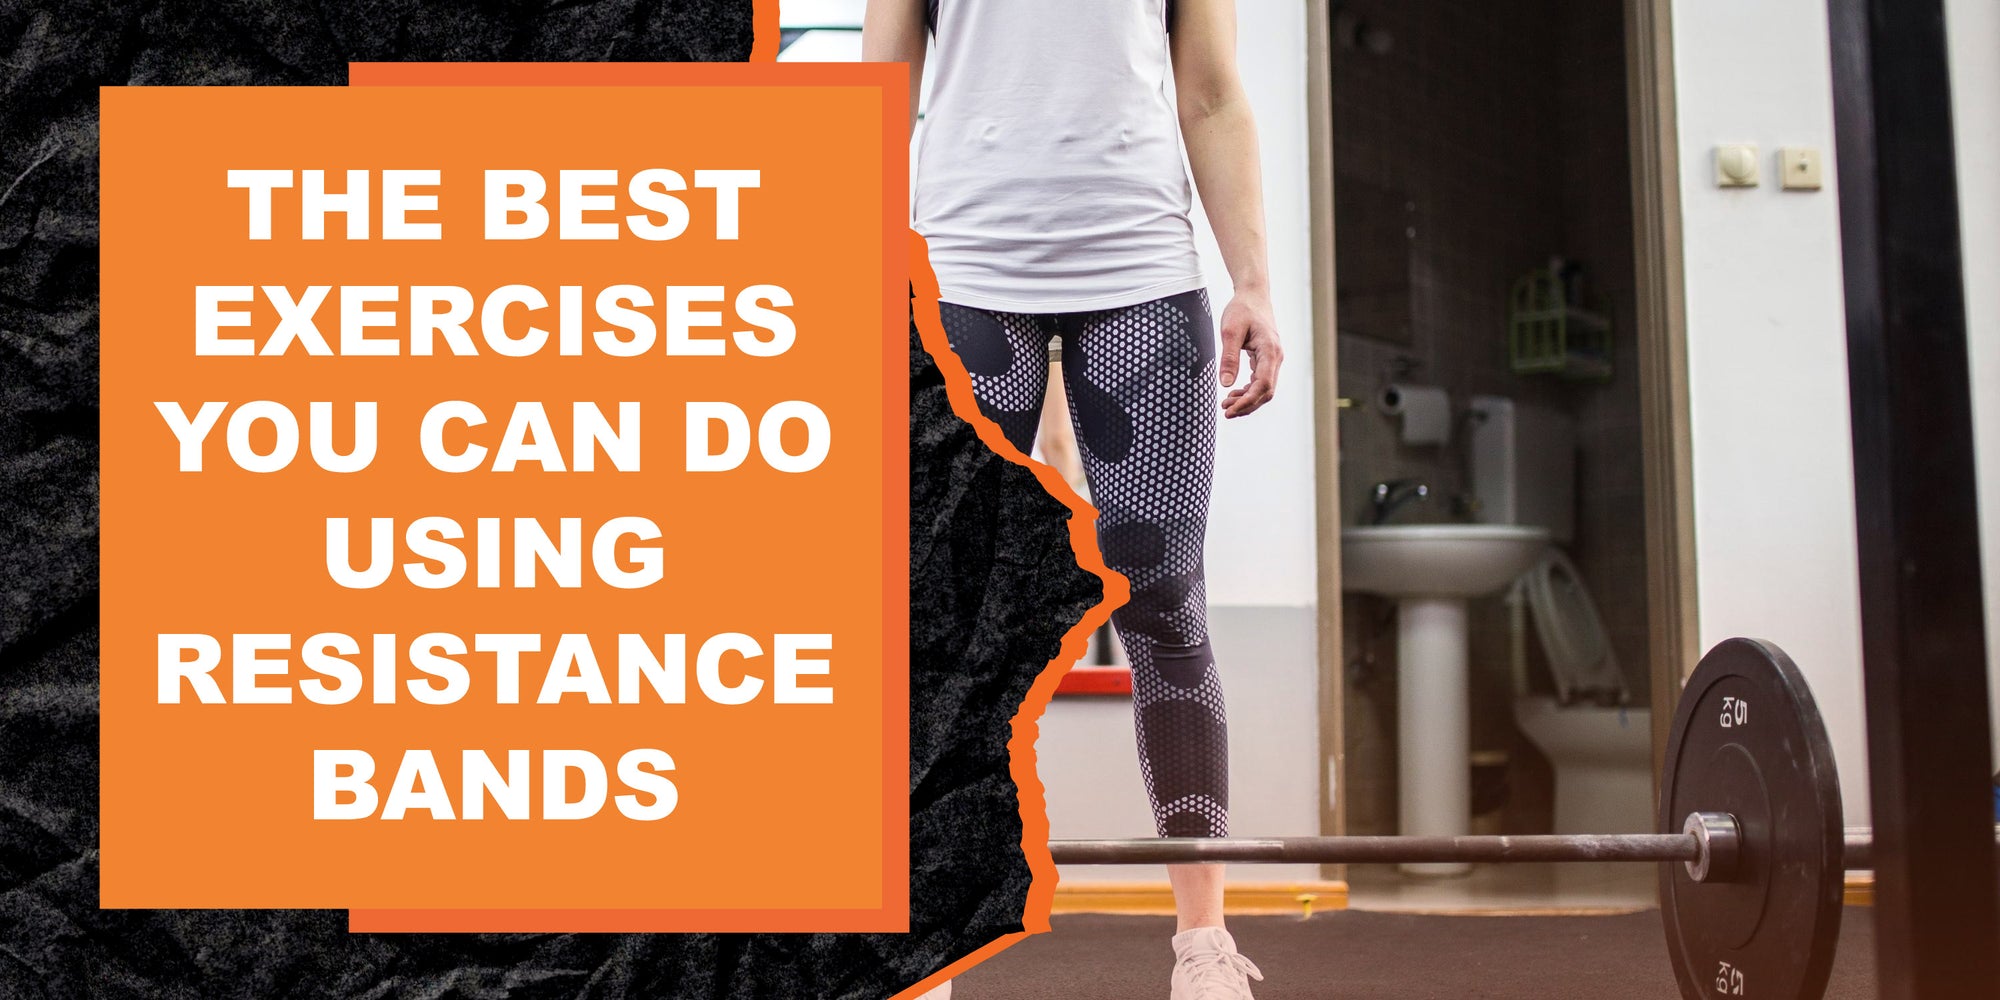 The Best Exercises You Can Do Using Resistance Bands